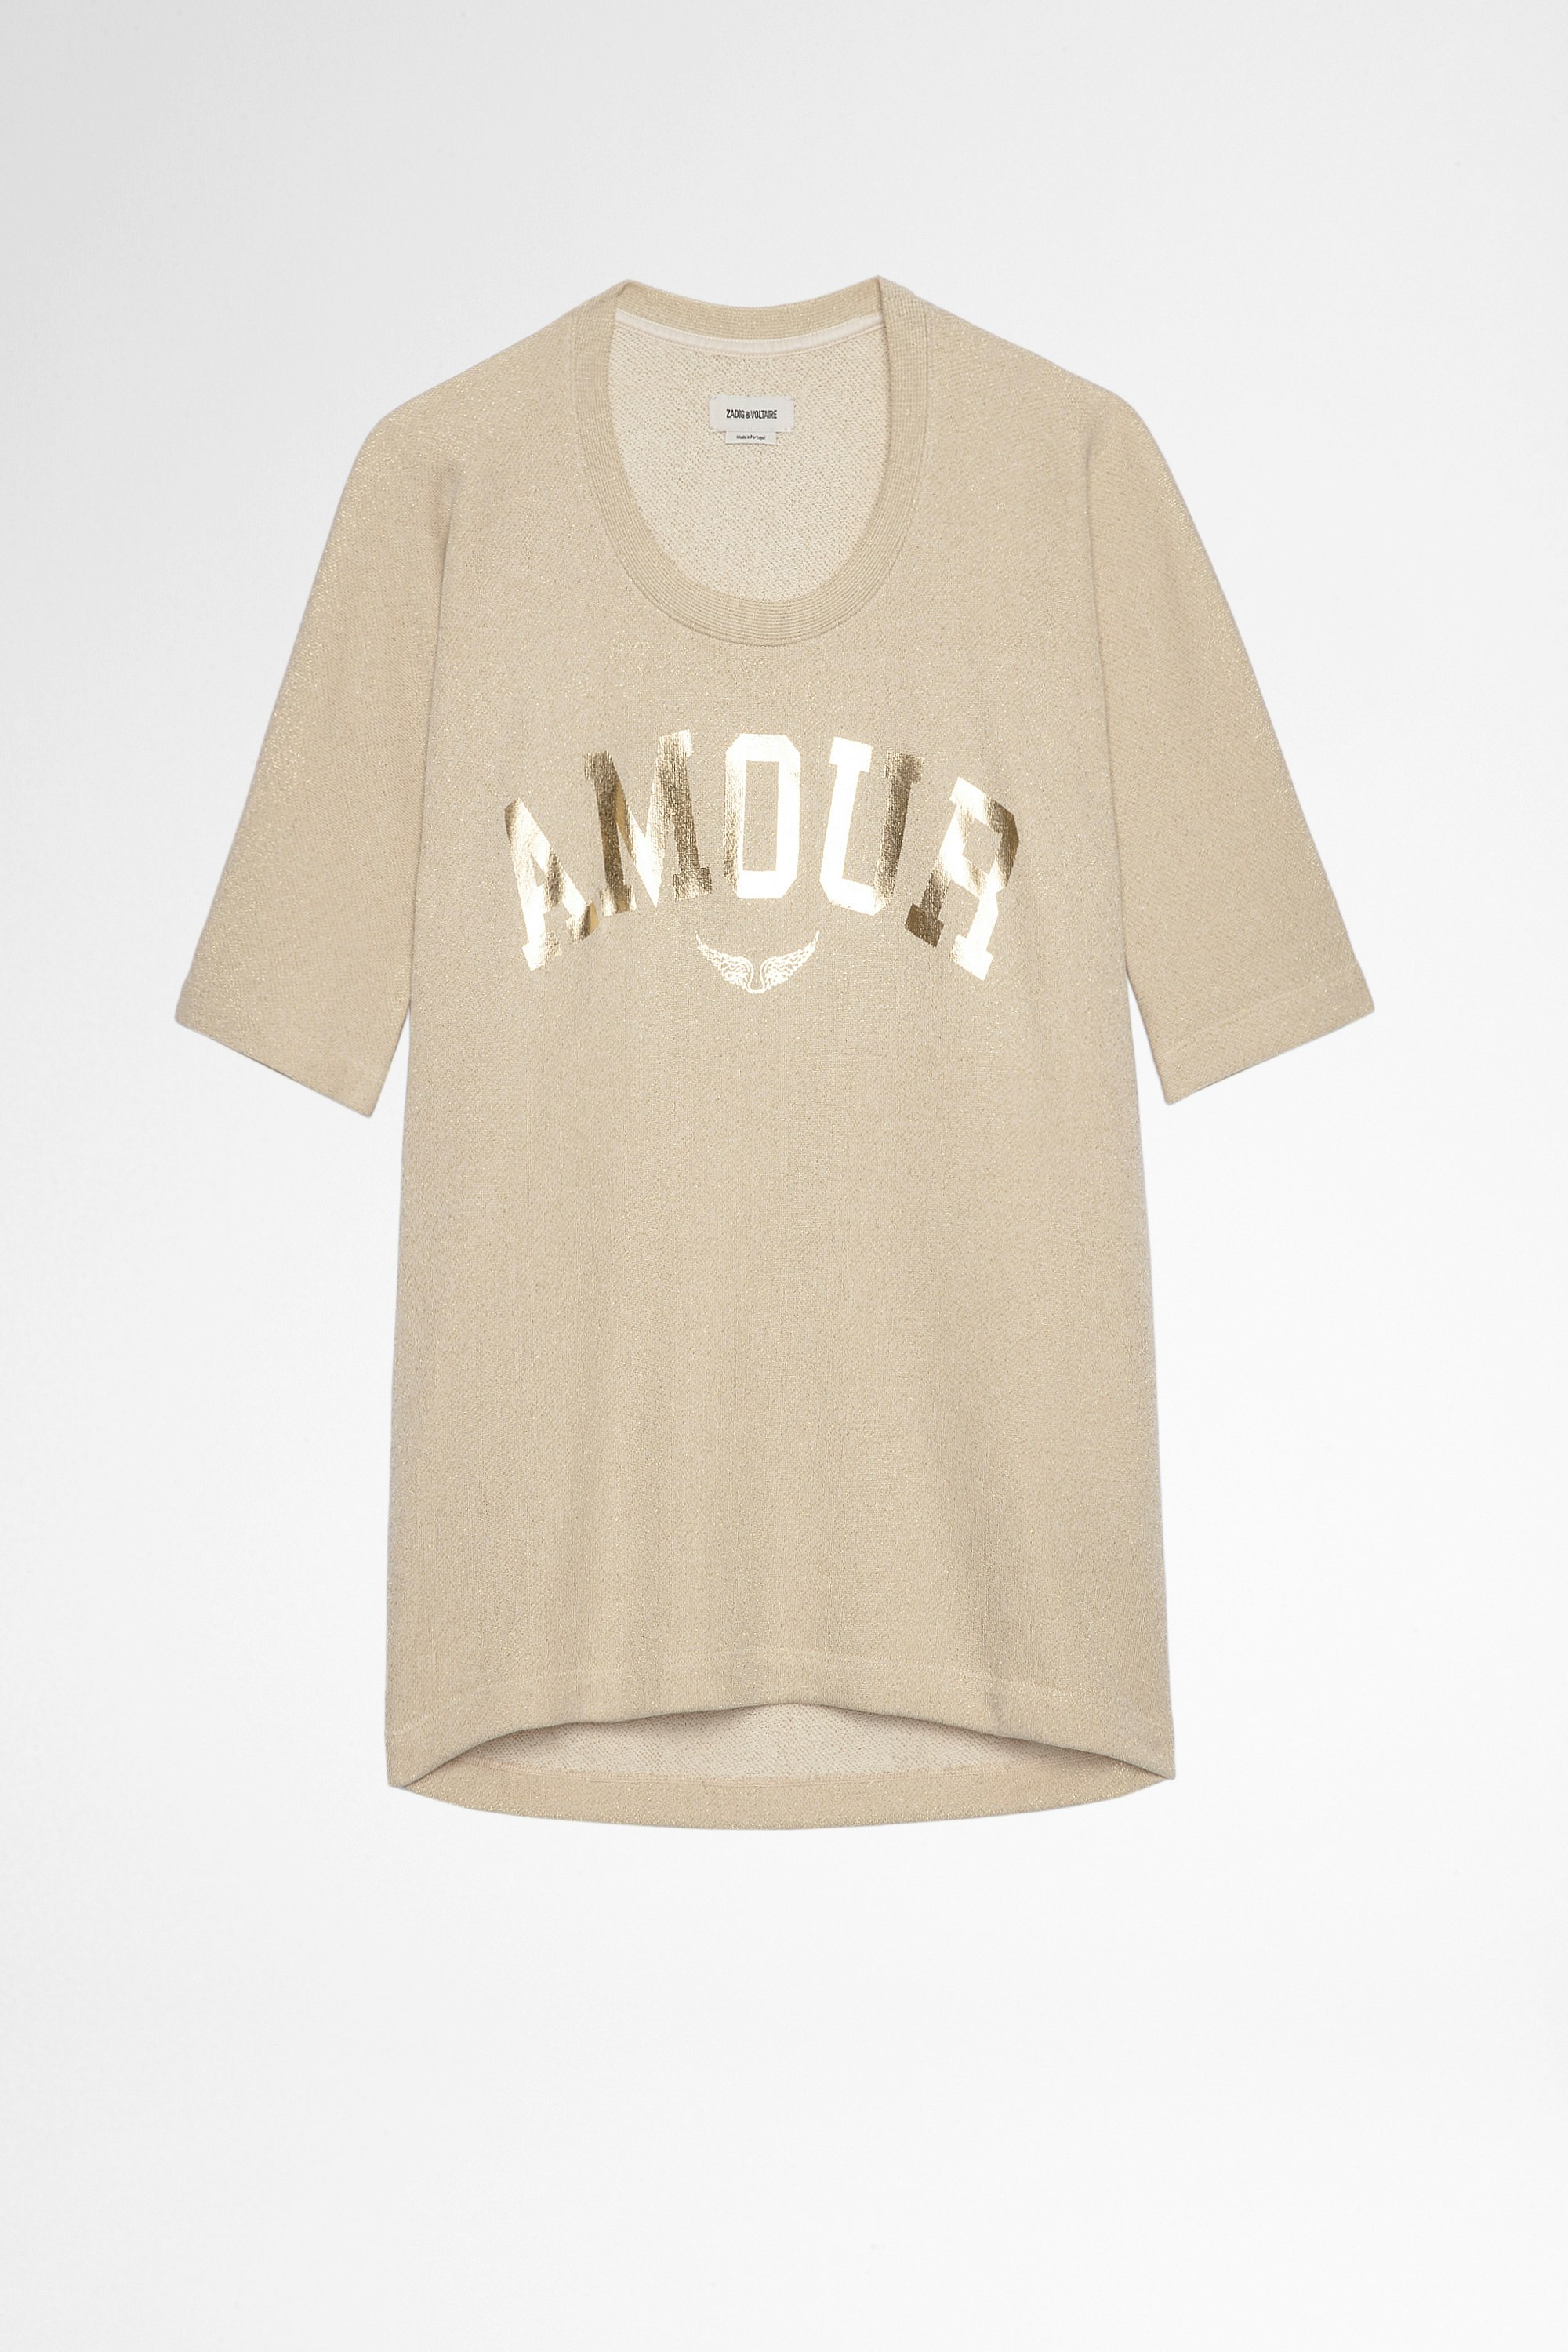 Portland Amour スウェット Women's short-sleeved Amour sweatshirt in gold cotton